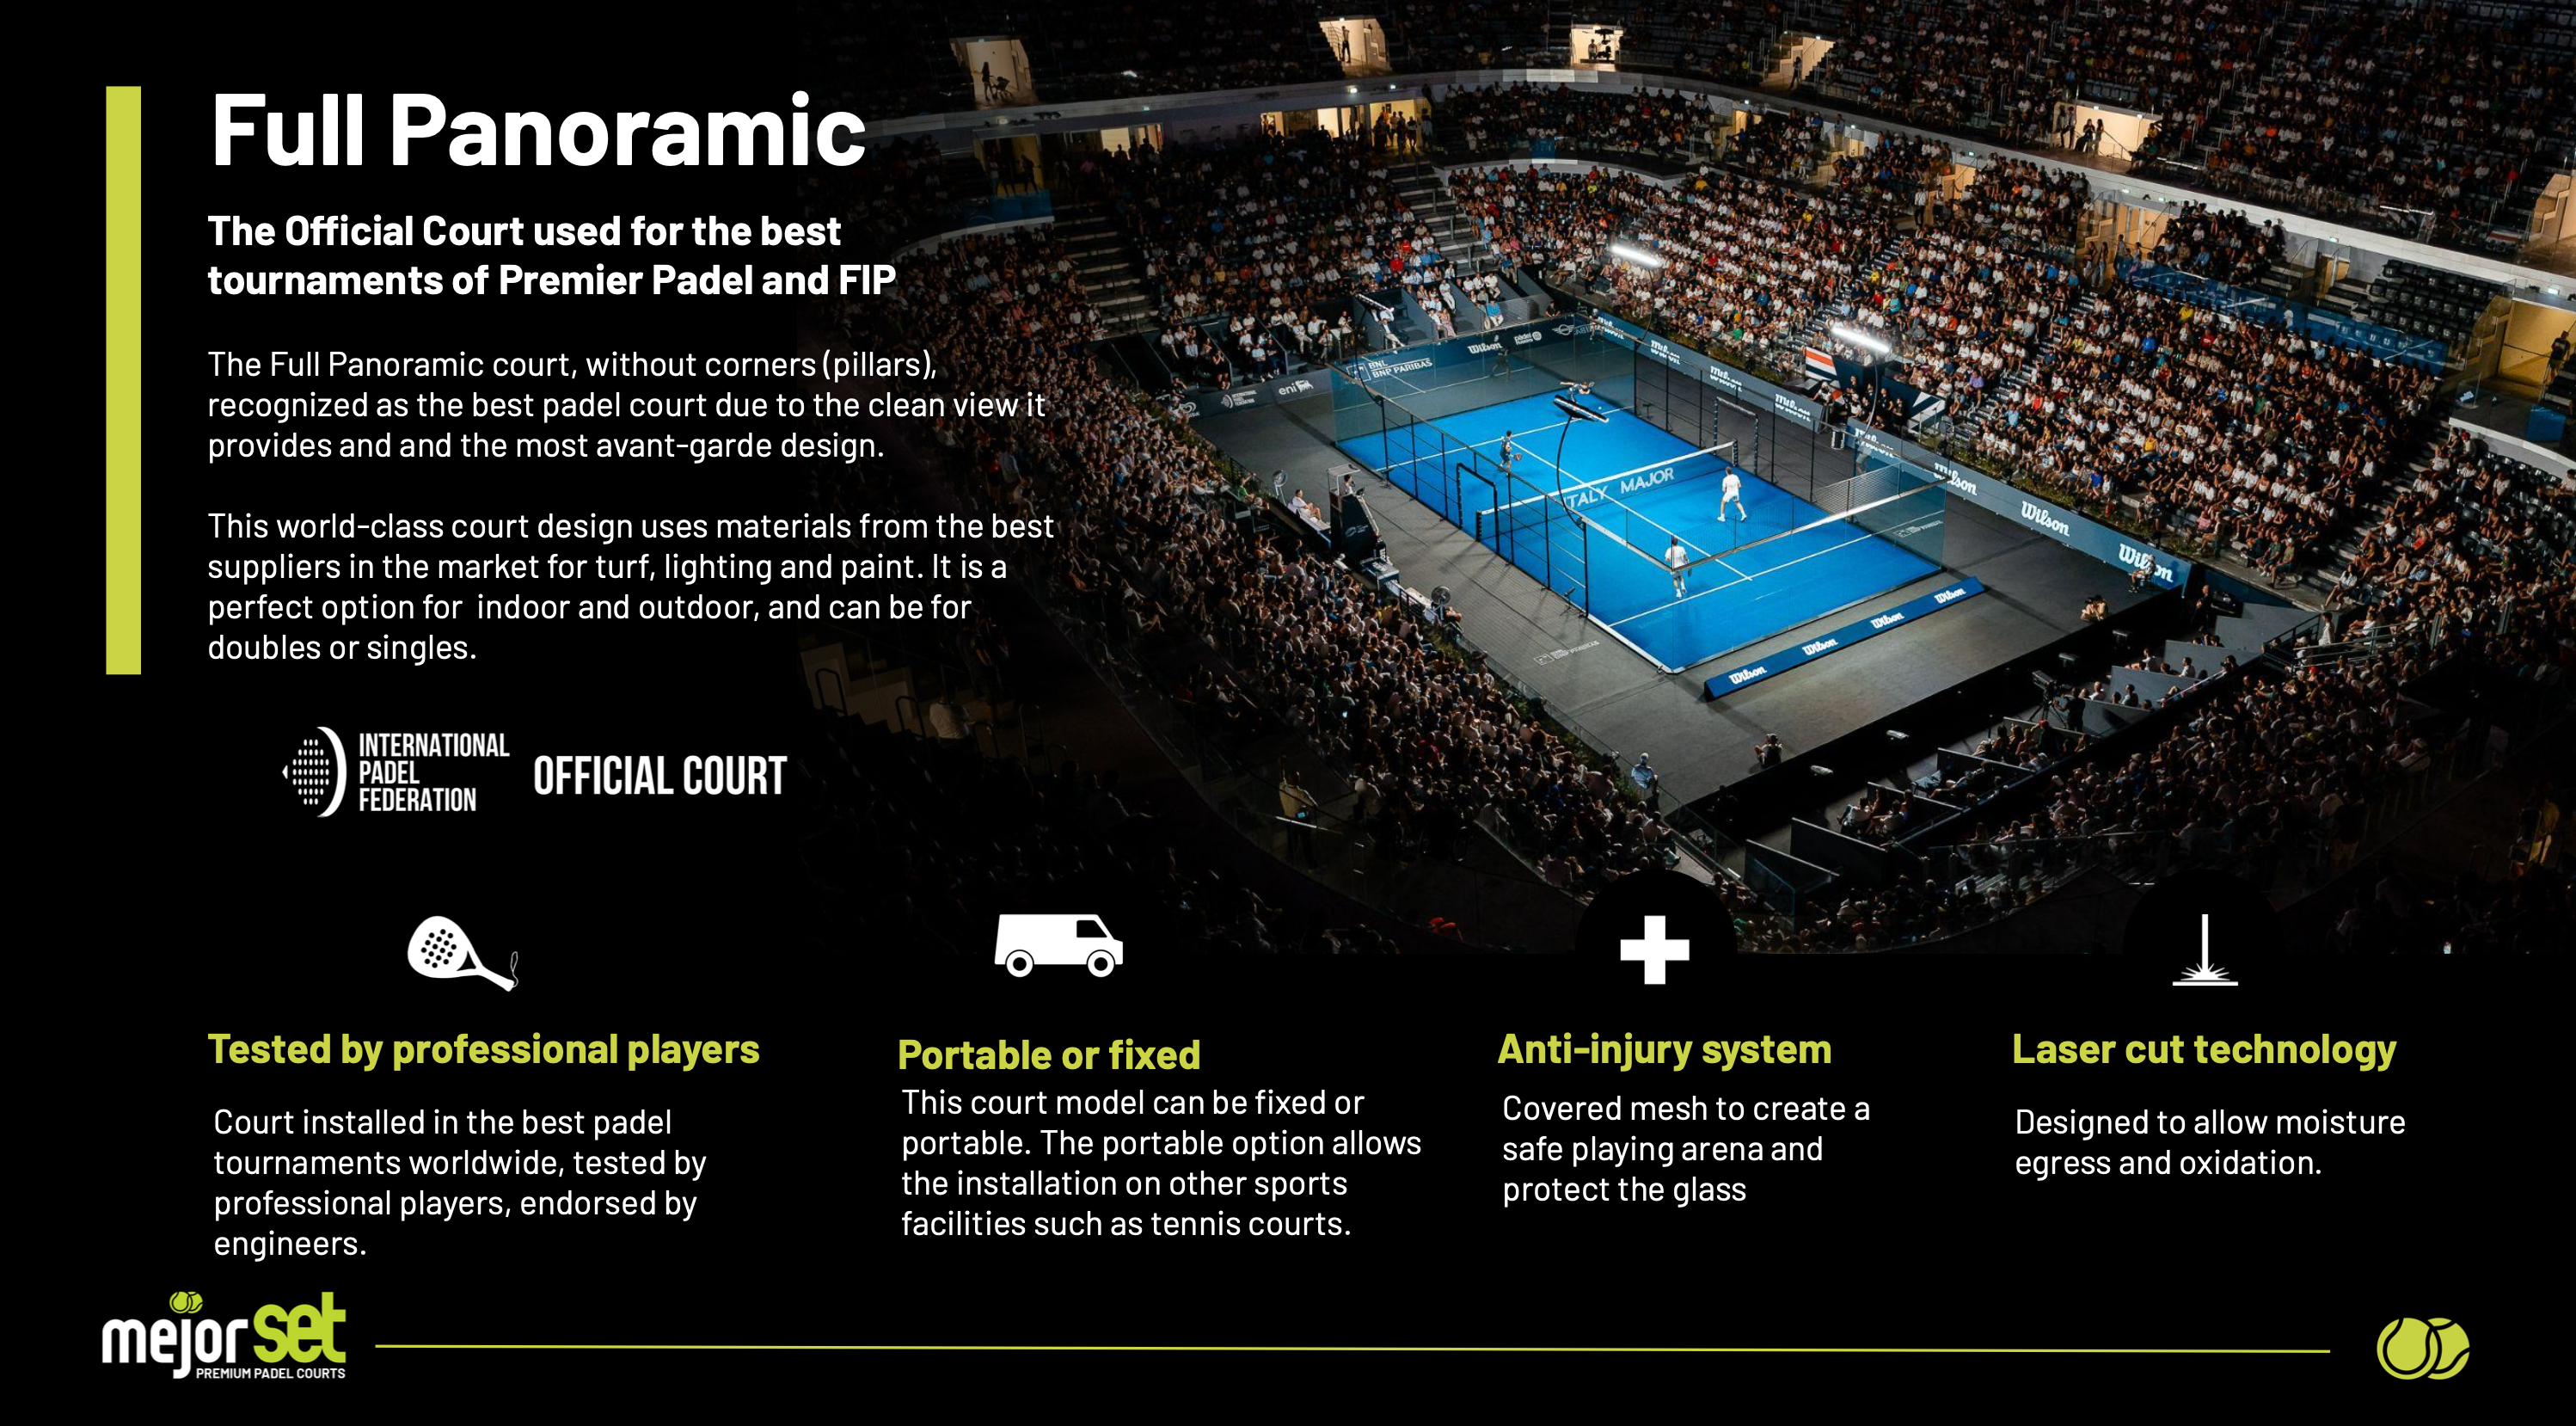 Padel in the USA - PADEL BOX COURTS IN THE USA